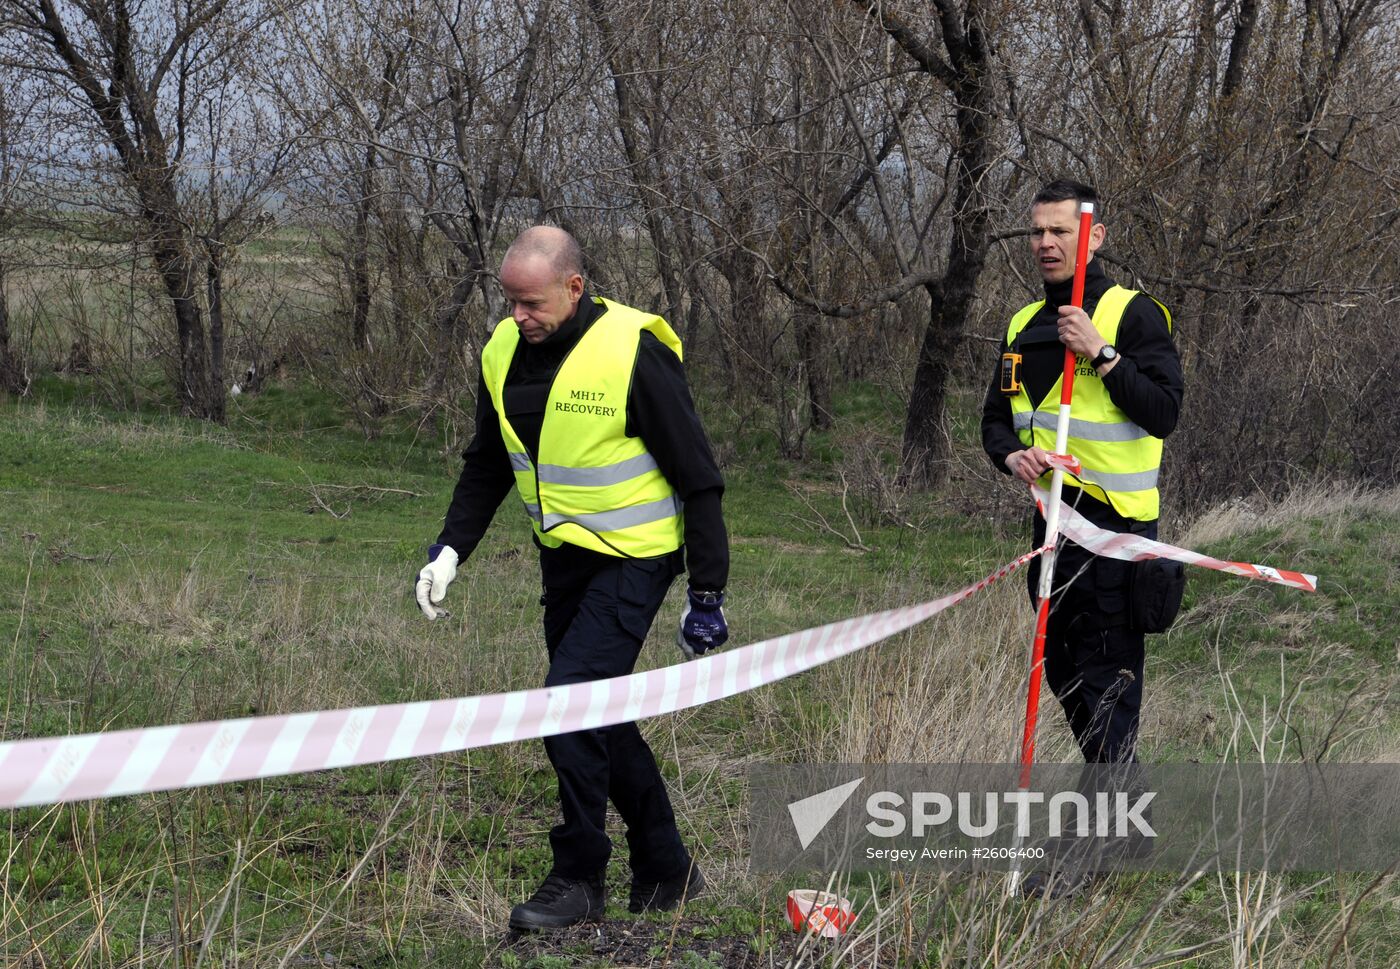 Dutch and Malaysian experts visit site of Malaysia Airlines flight MH17 plane crash